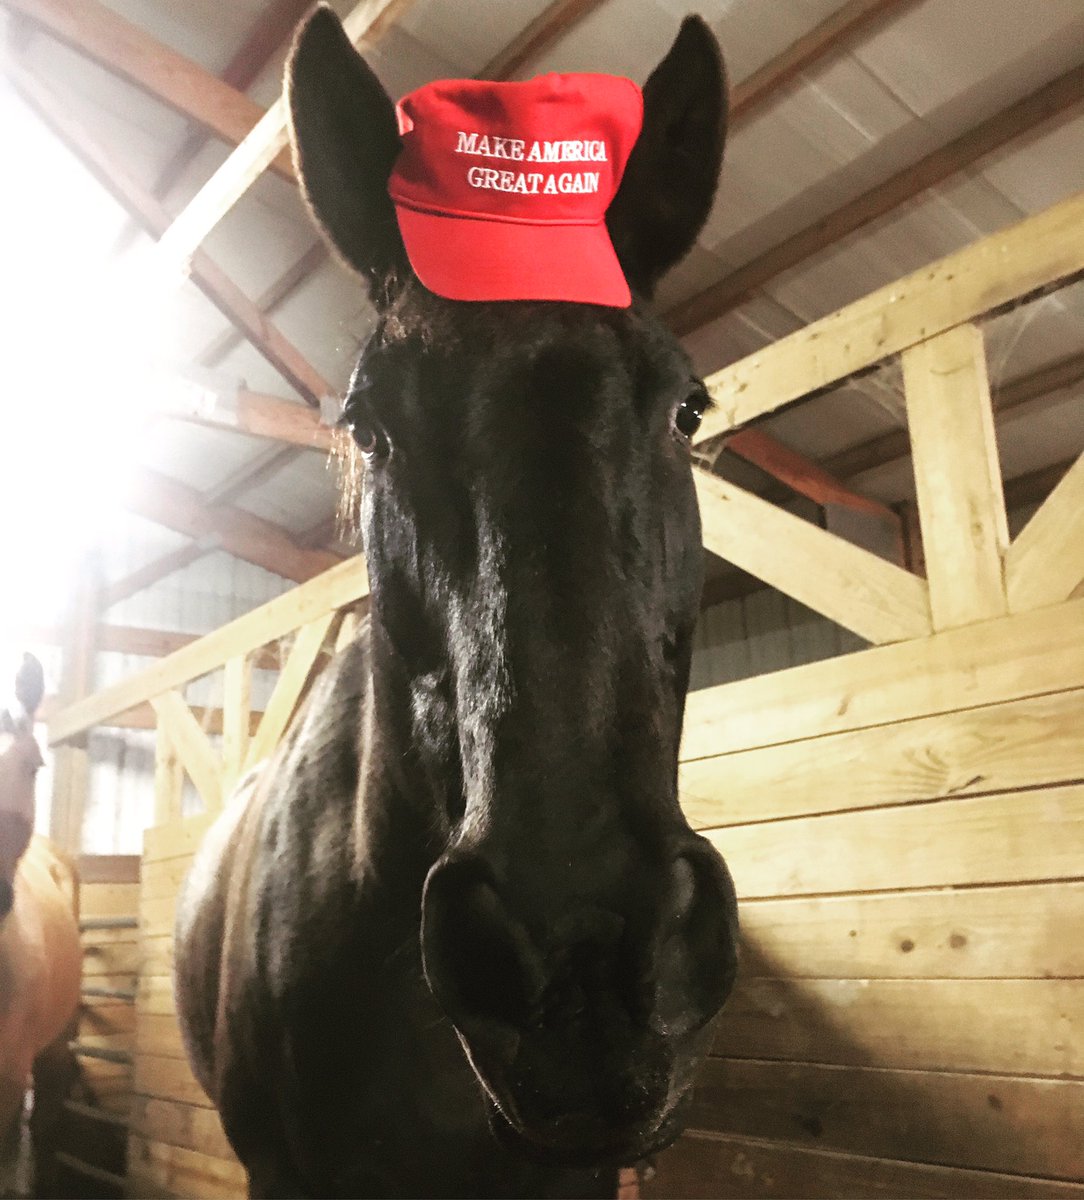 @POTUS my #retiredpolicehorse and I support you! #MAGA #proudamerican